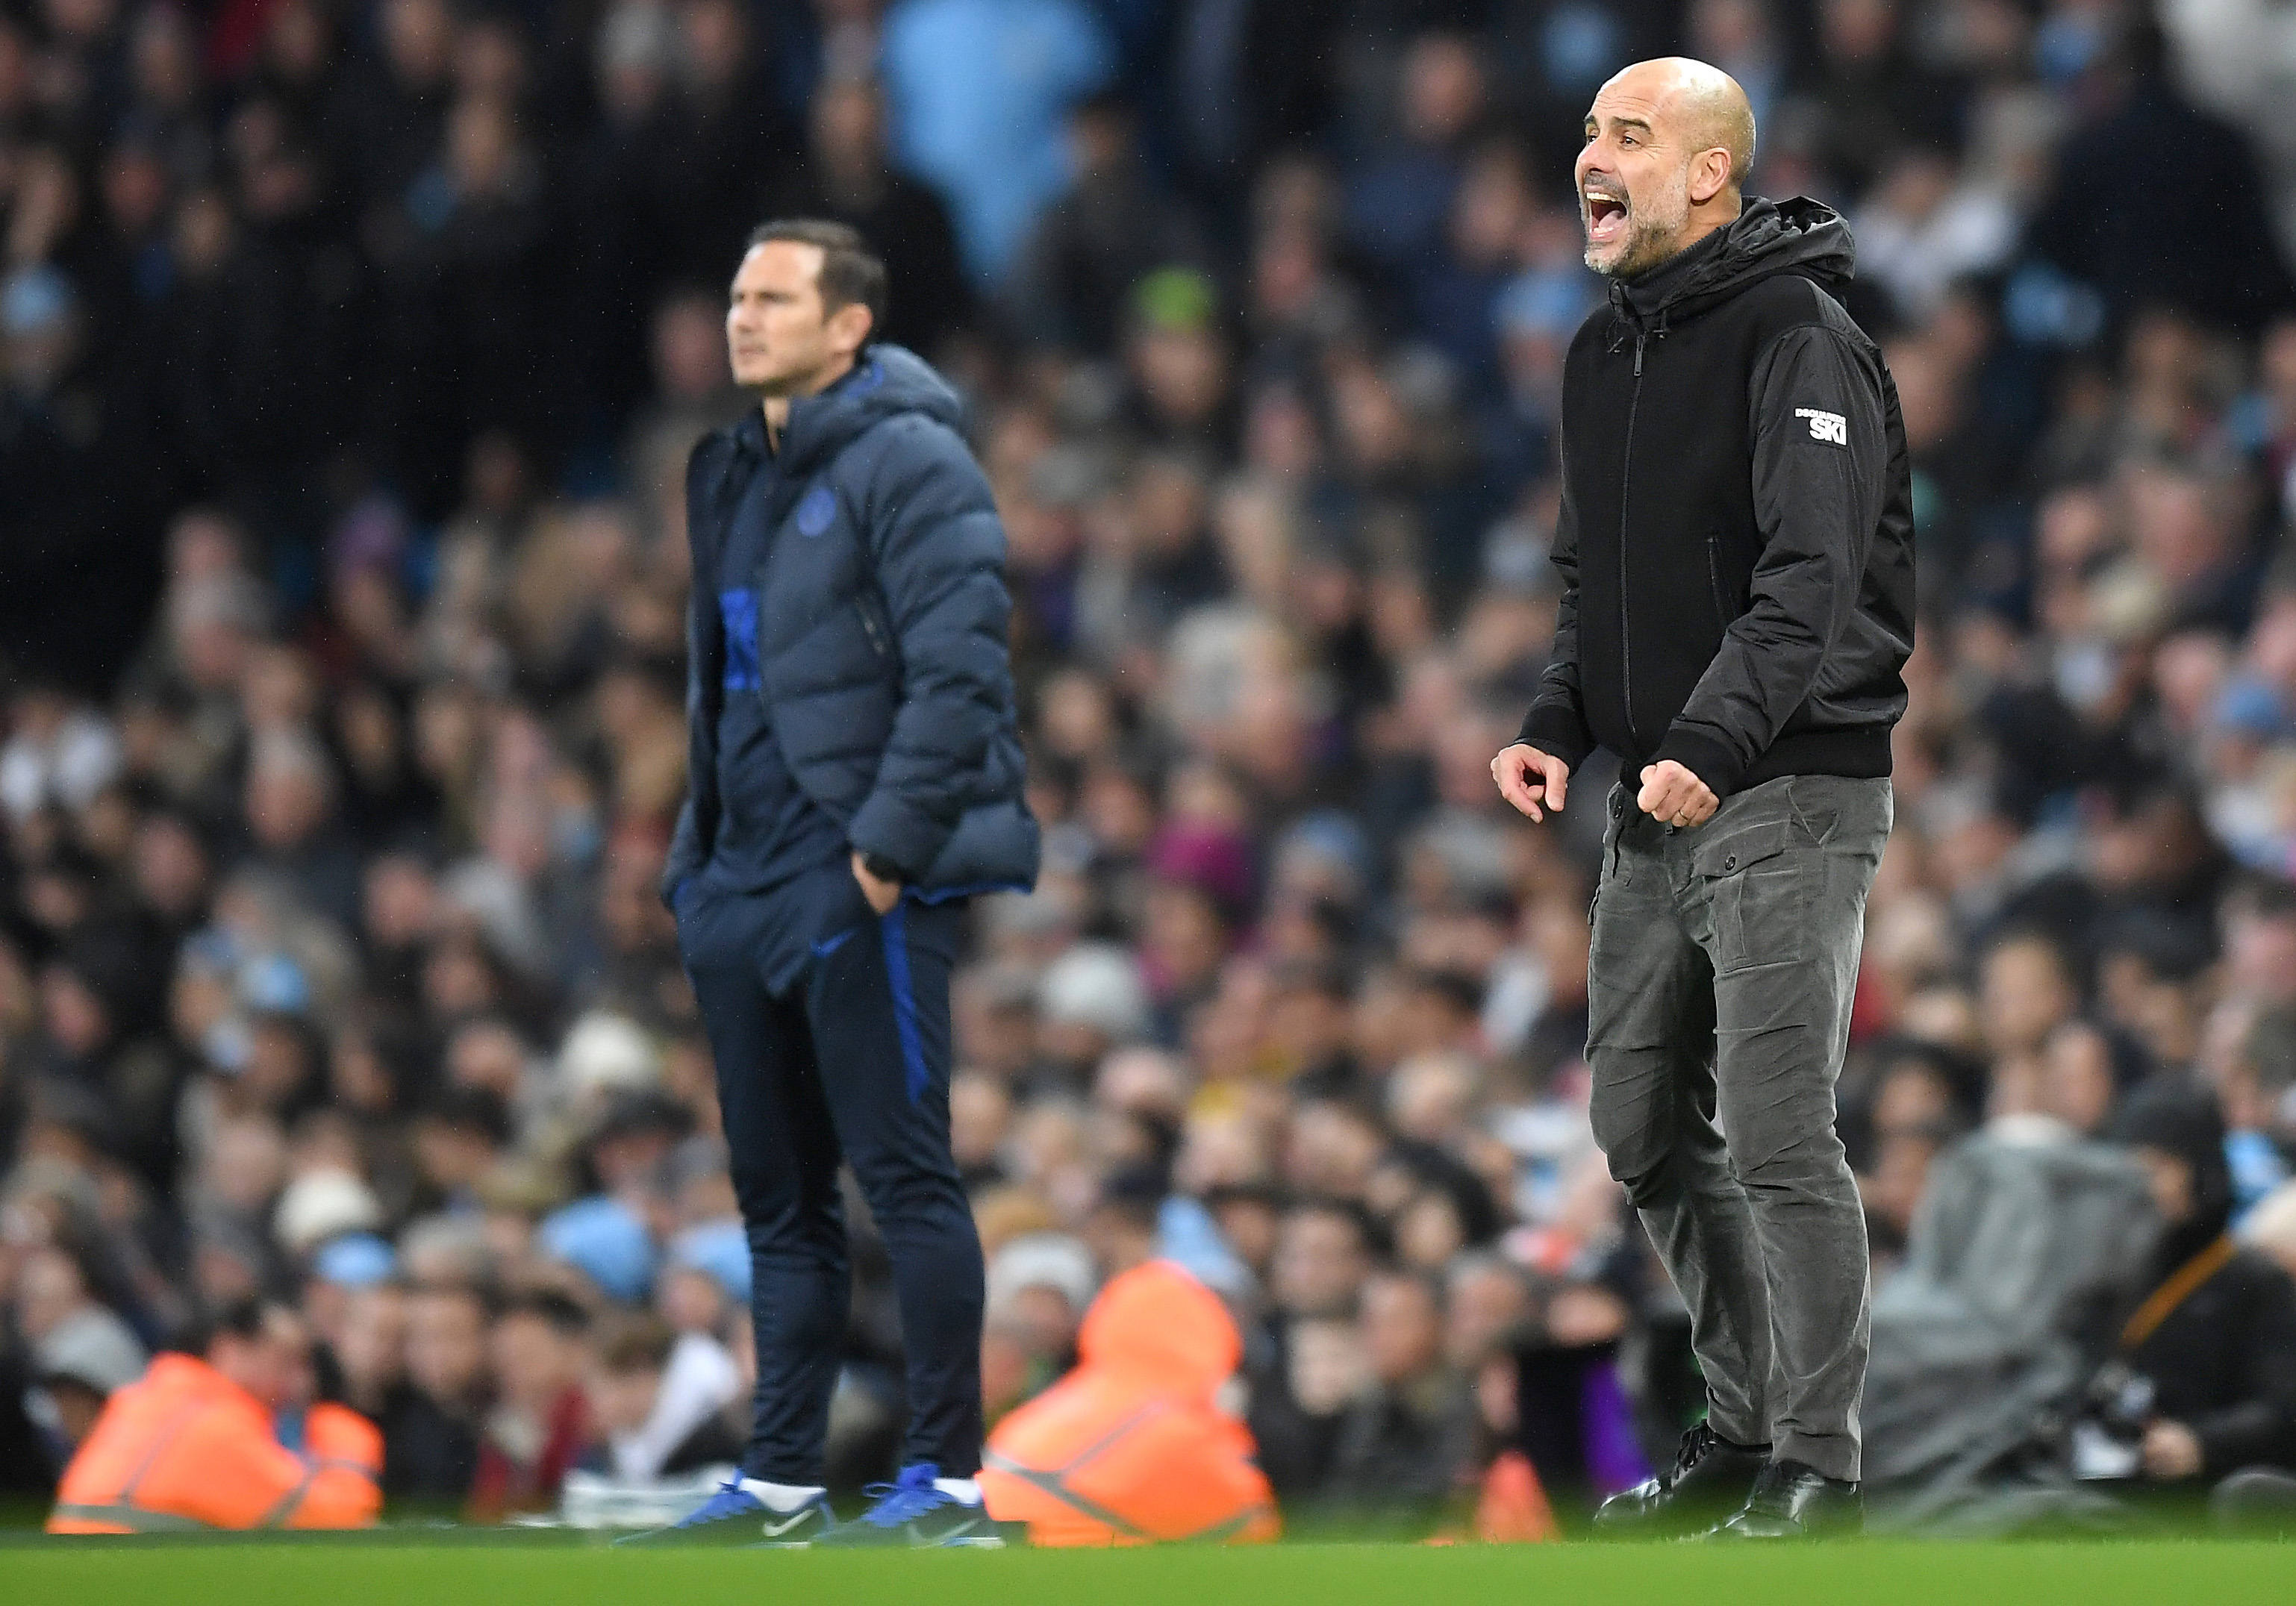 Chelsea Vs Manchester City : Manchester City vs Chelsea: El premio económico que se ... - Fernandinho has had to fight for his place this season, but pep guardiola has favoured his experience in the bigger games.